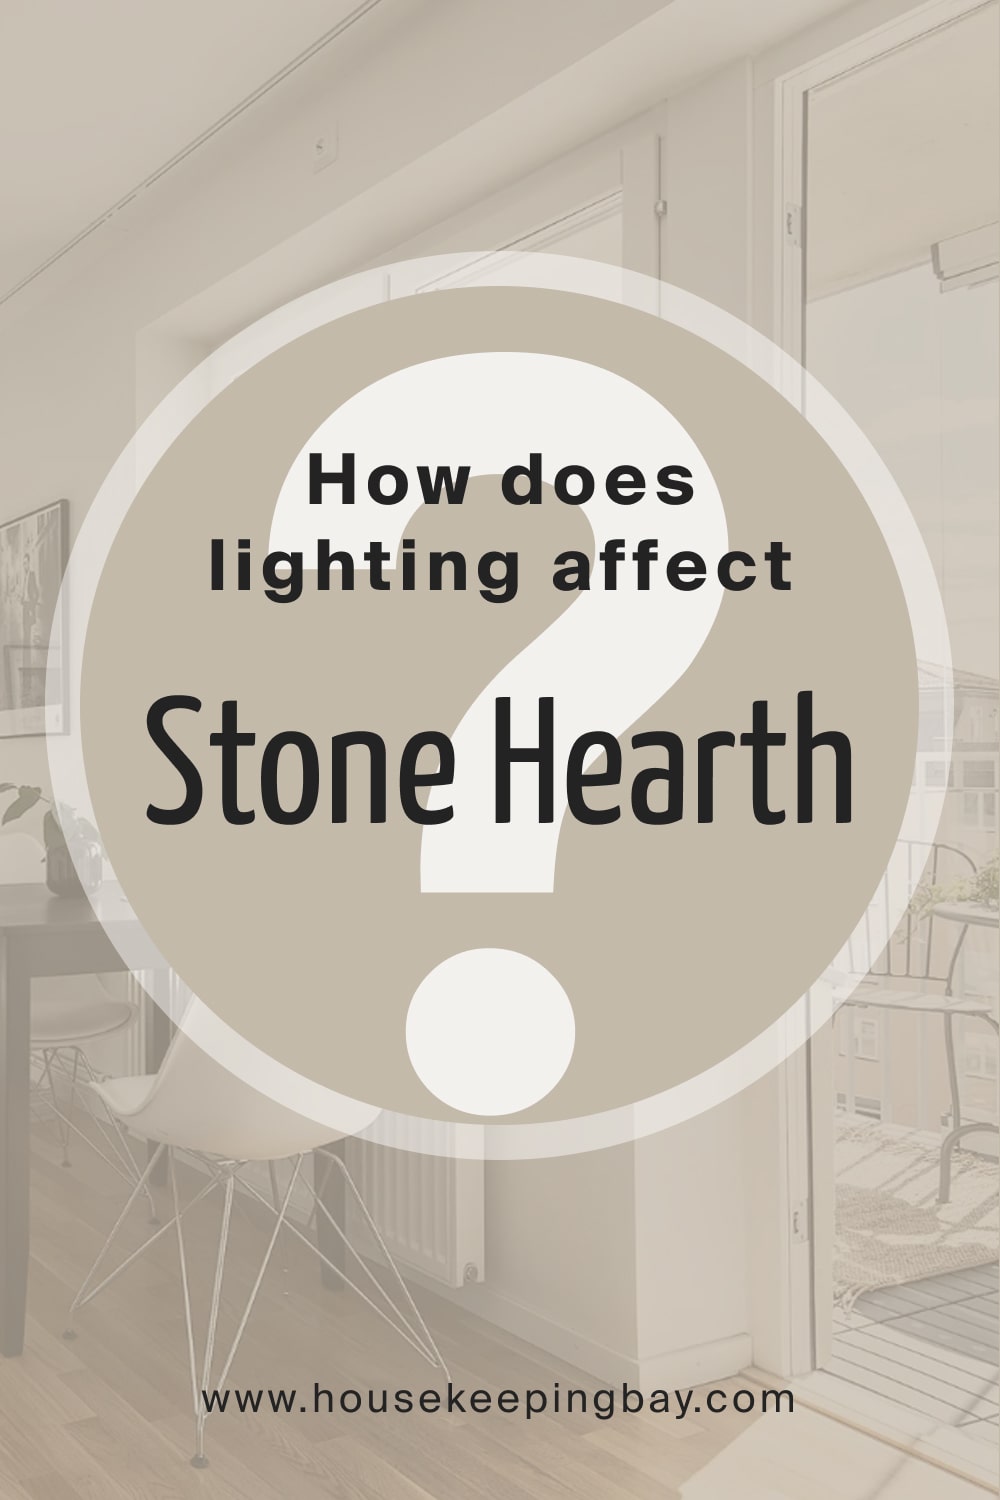 How does lighting affect Stone hearth